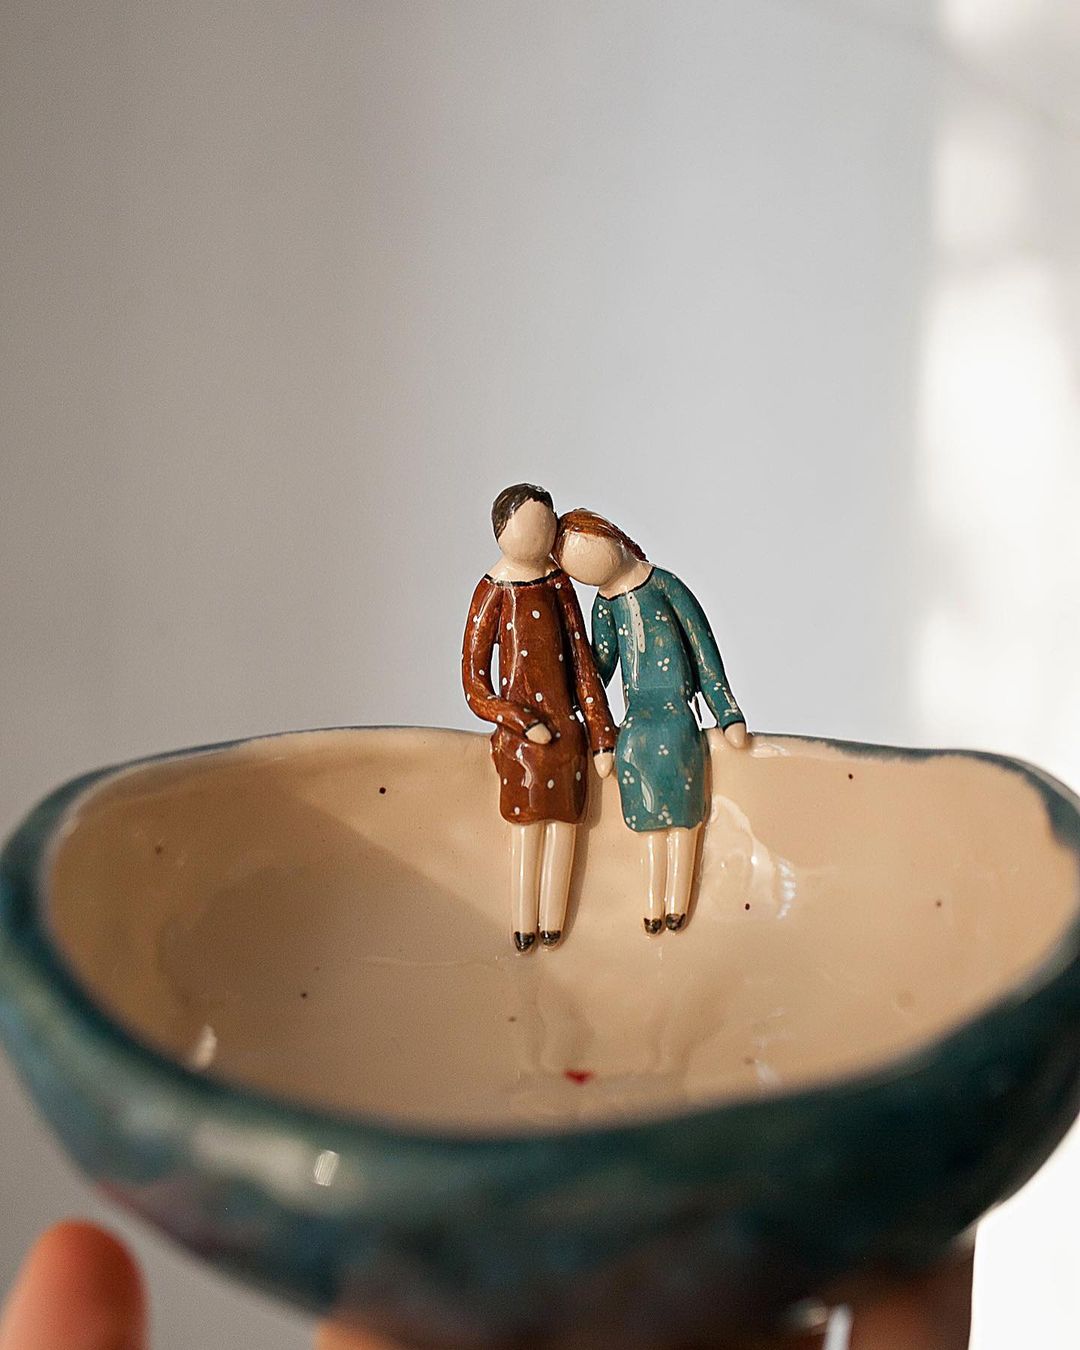 Delicate Ceramics Decorated With Lovely Figure Sculptures By Nadya And Olga (8)